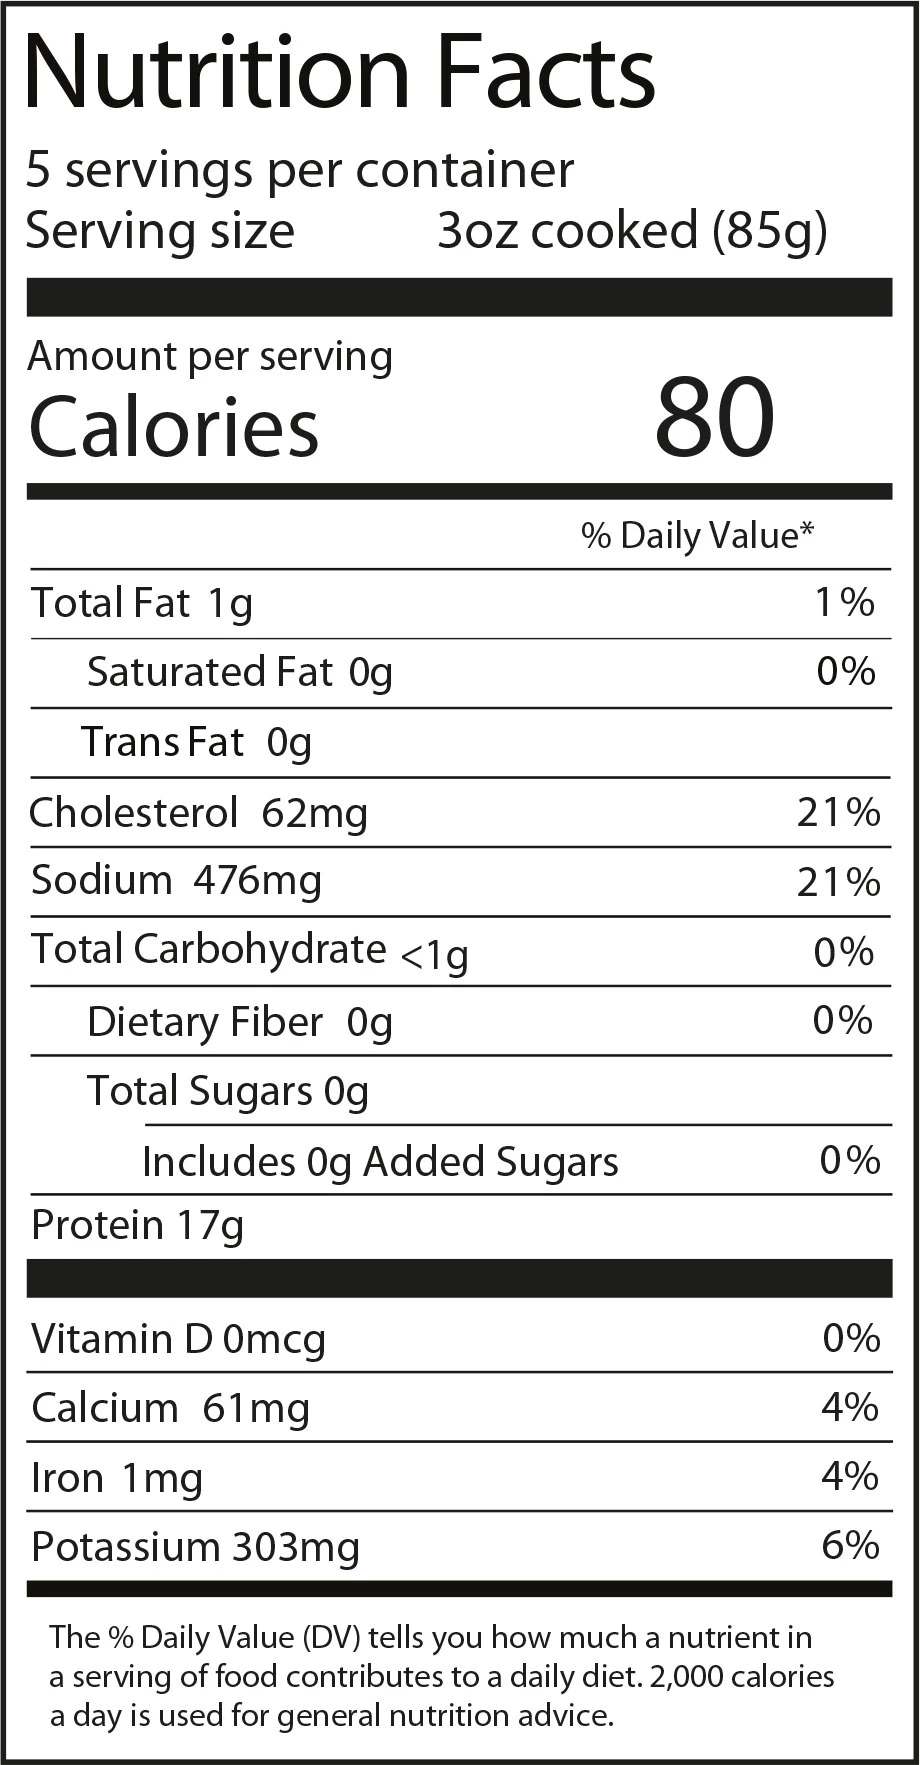 Backfin Nutrition Facts